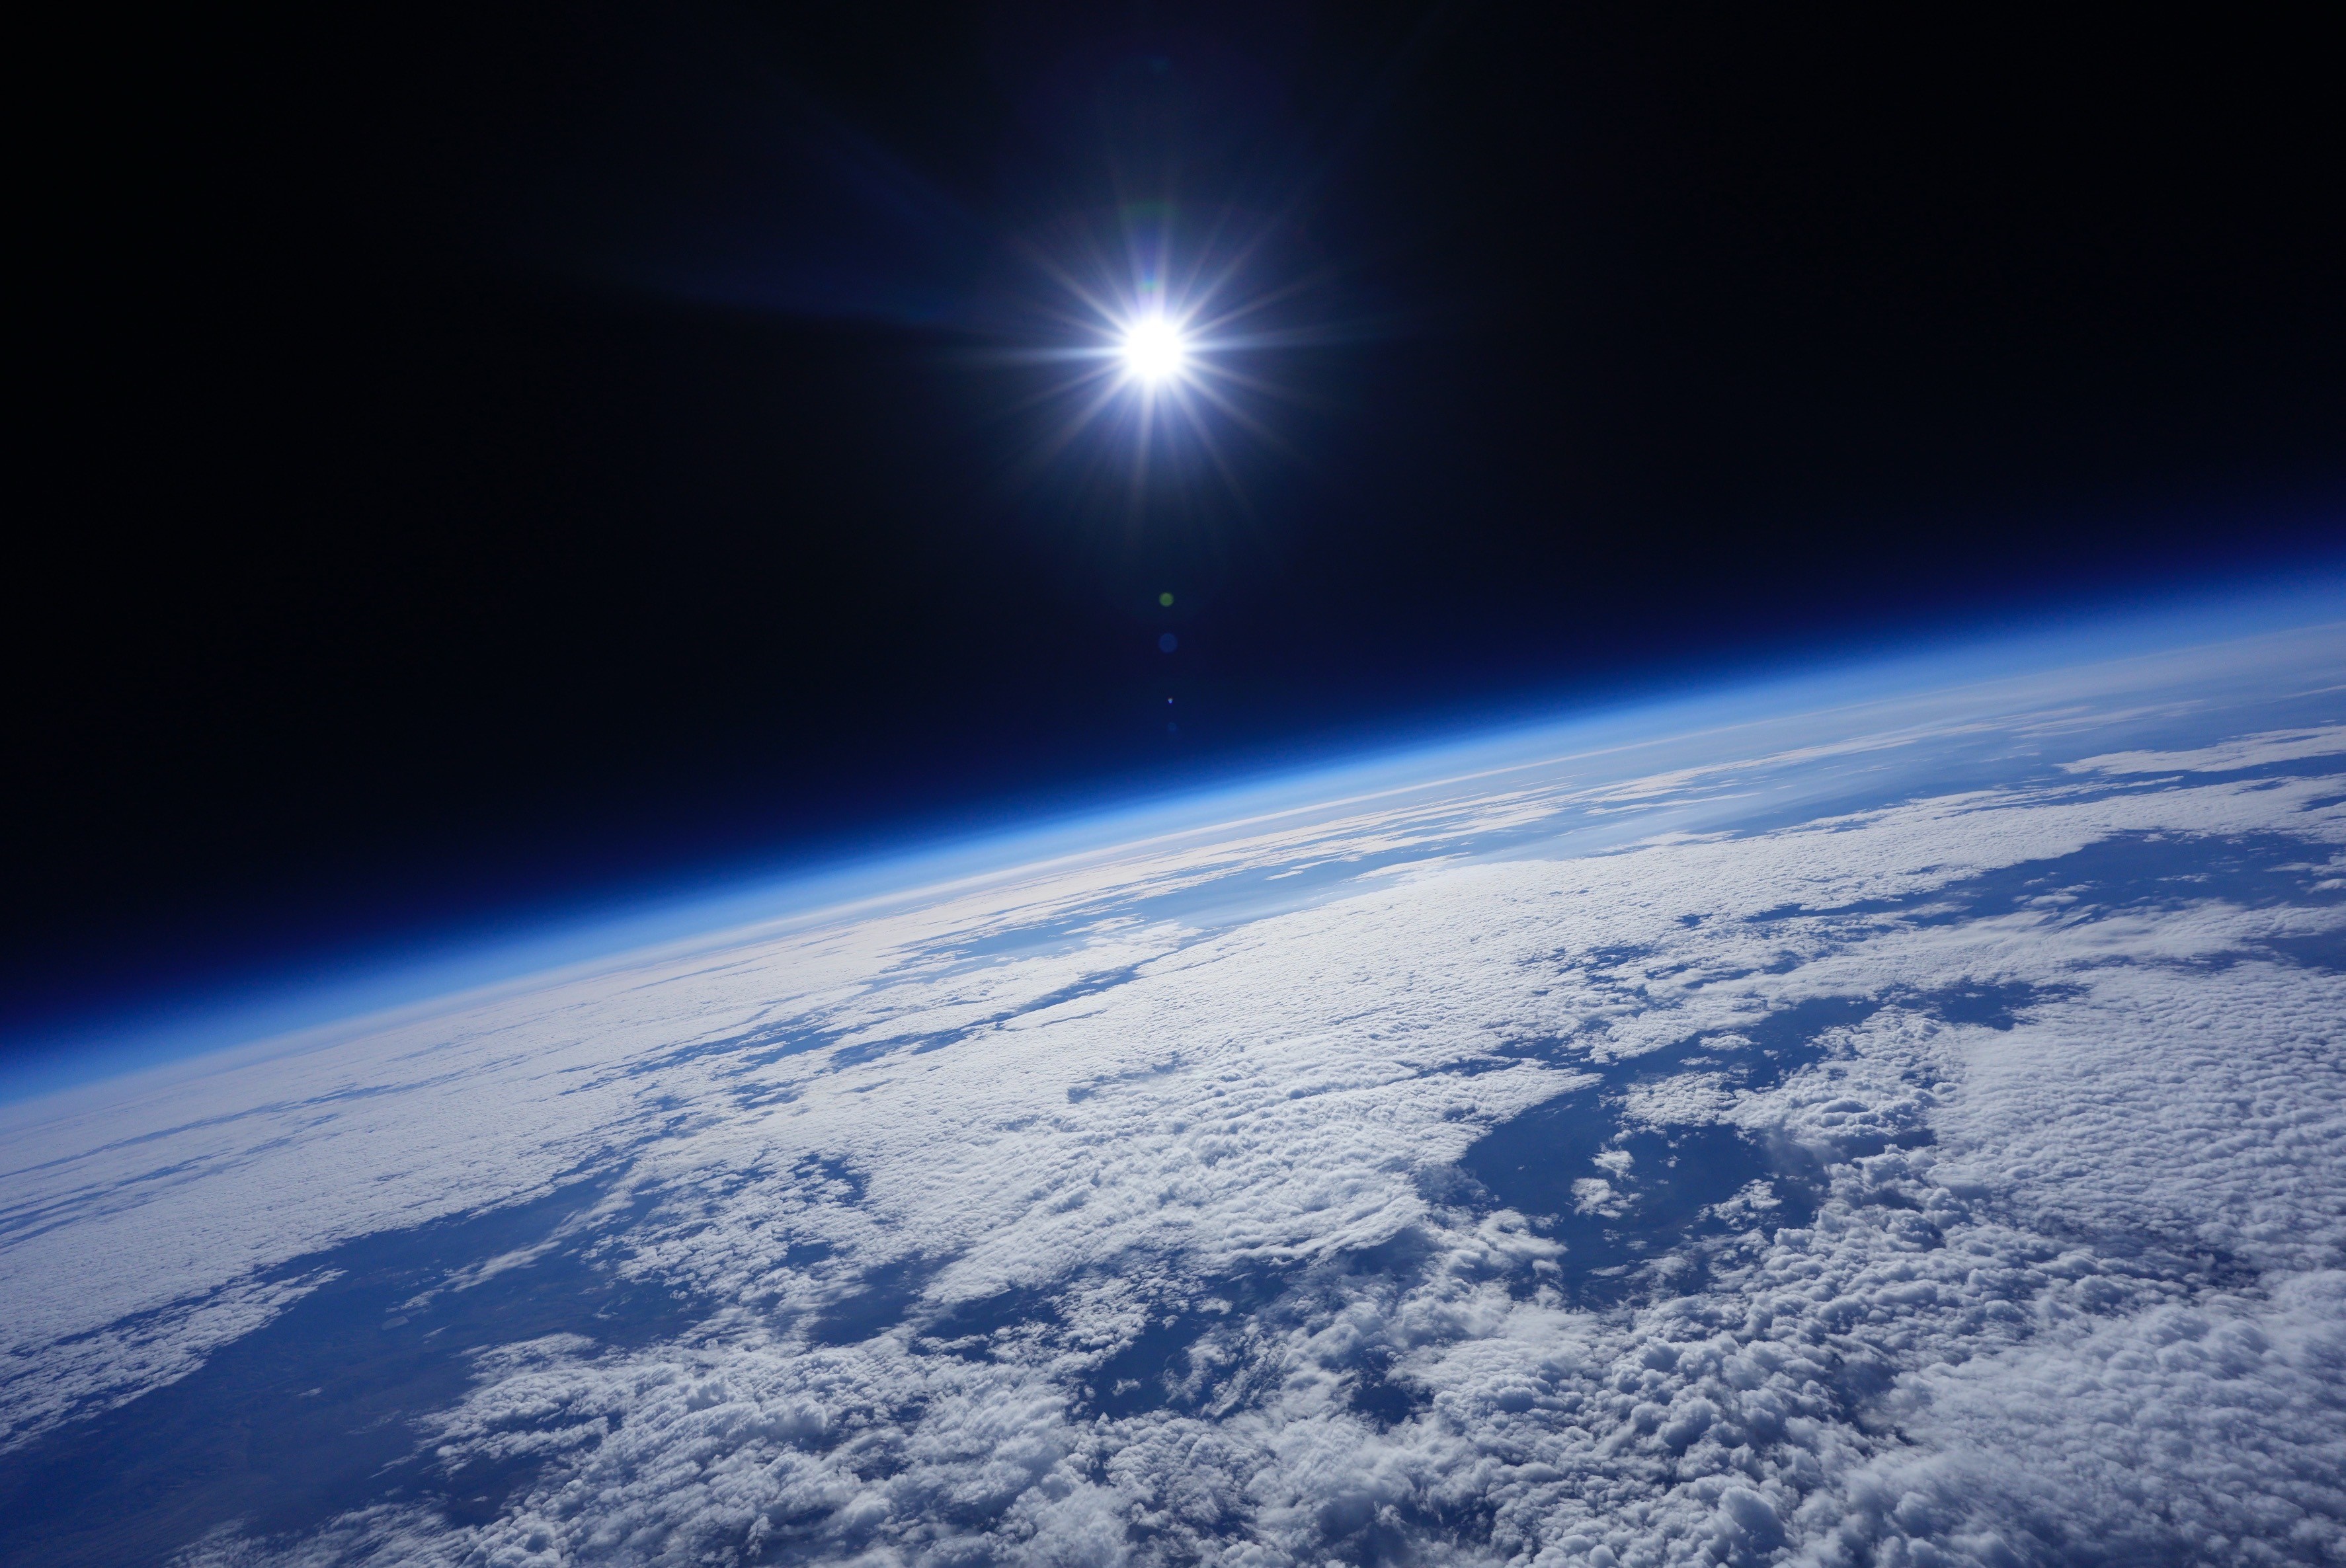 view of the Earth from a space-like perspective, with the sun in the frame